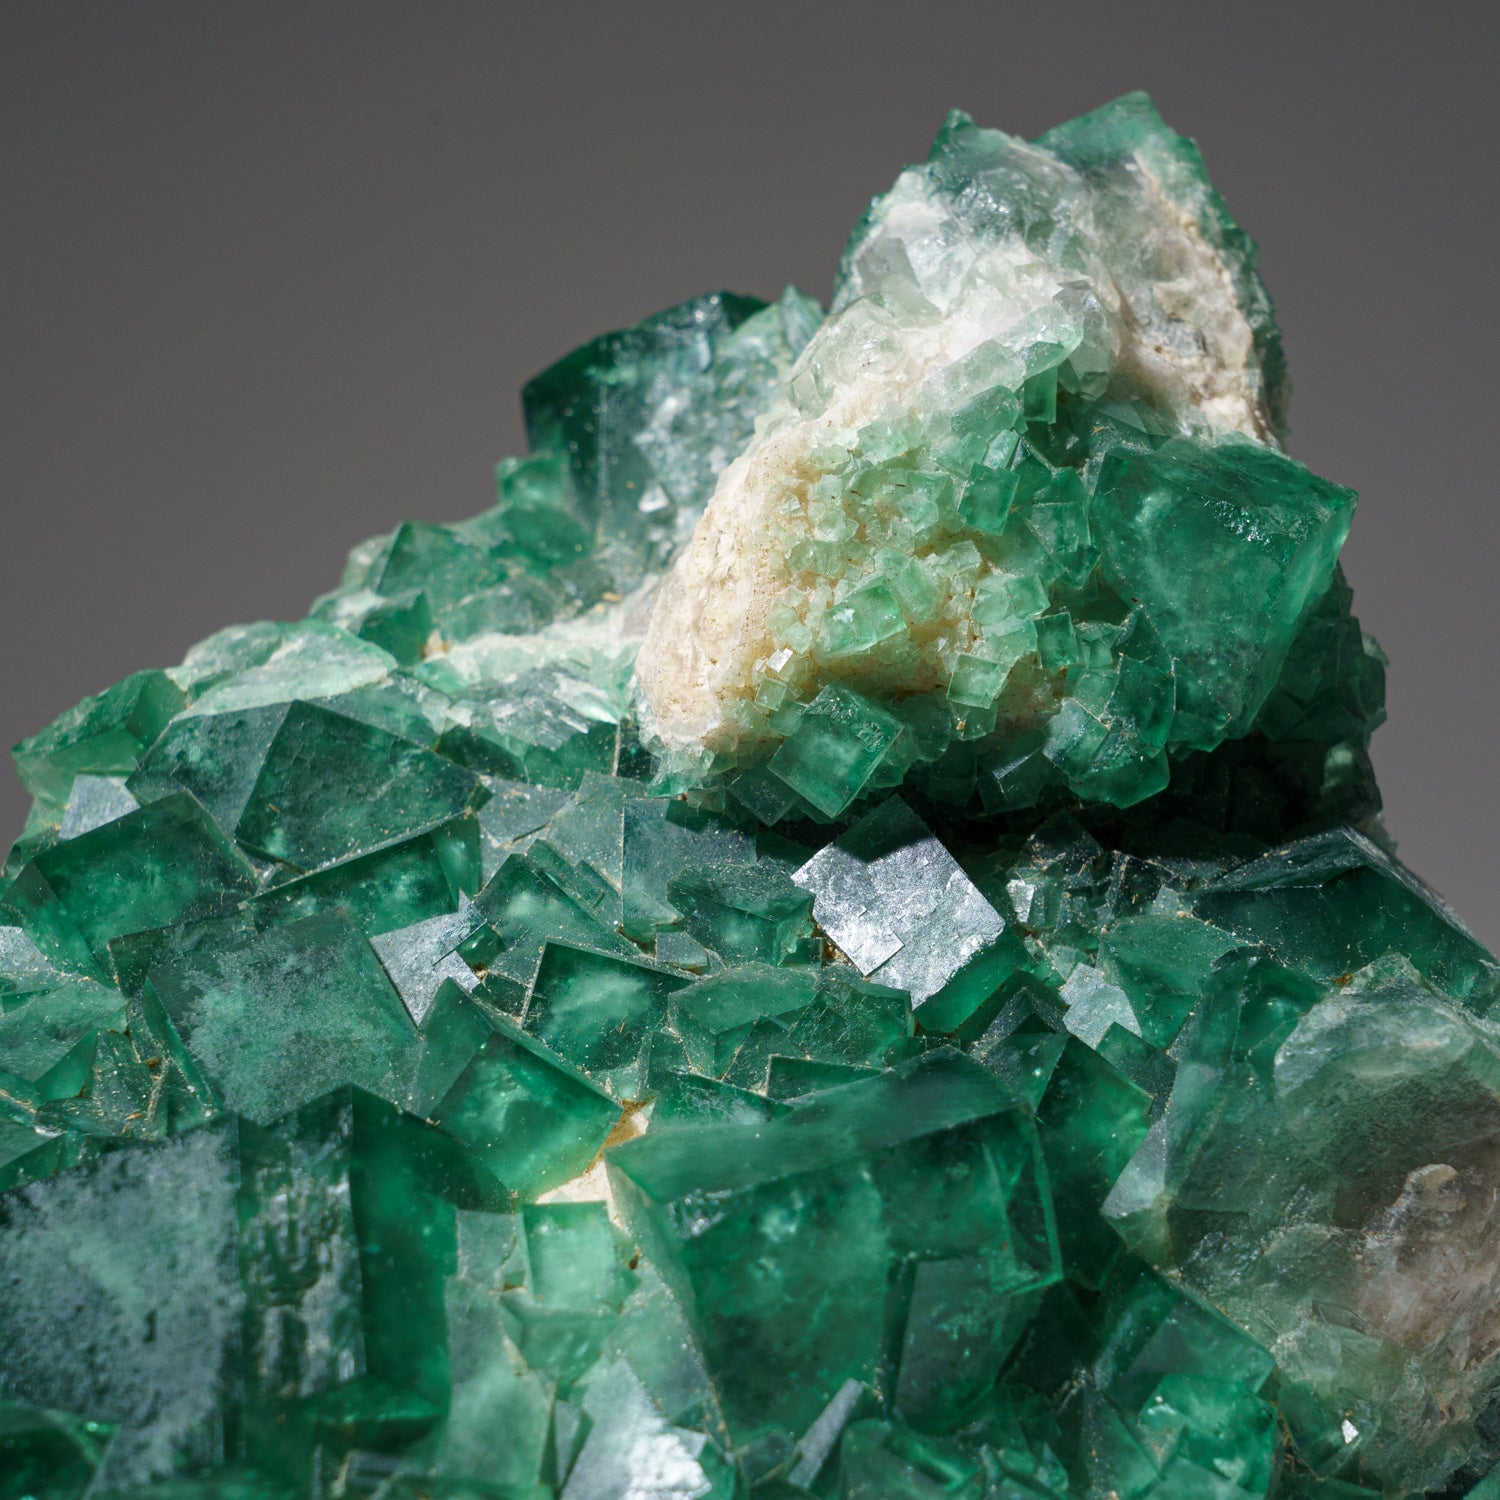 Genuine Green Fluorite from Namibia (4.5 lbs)